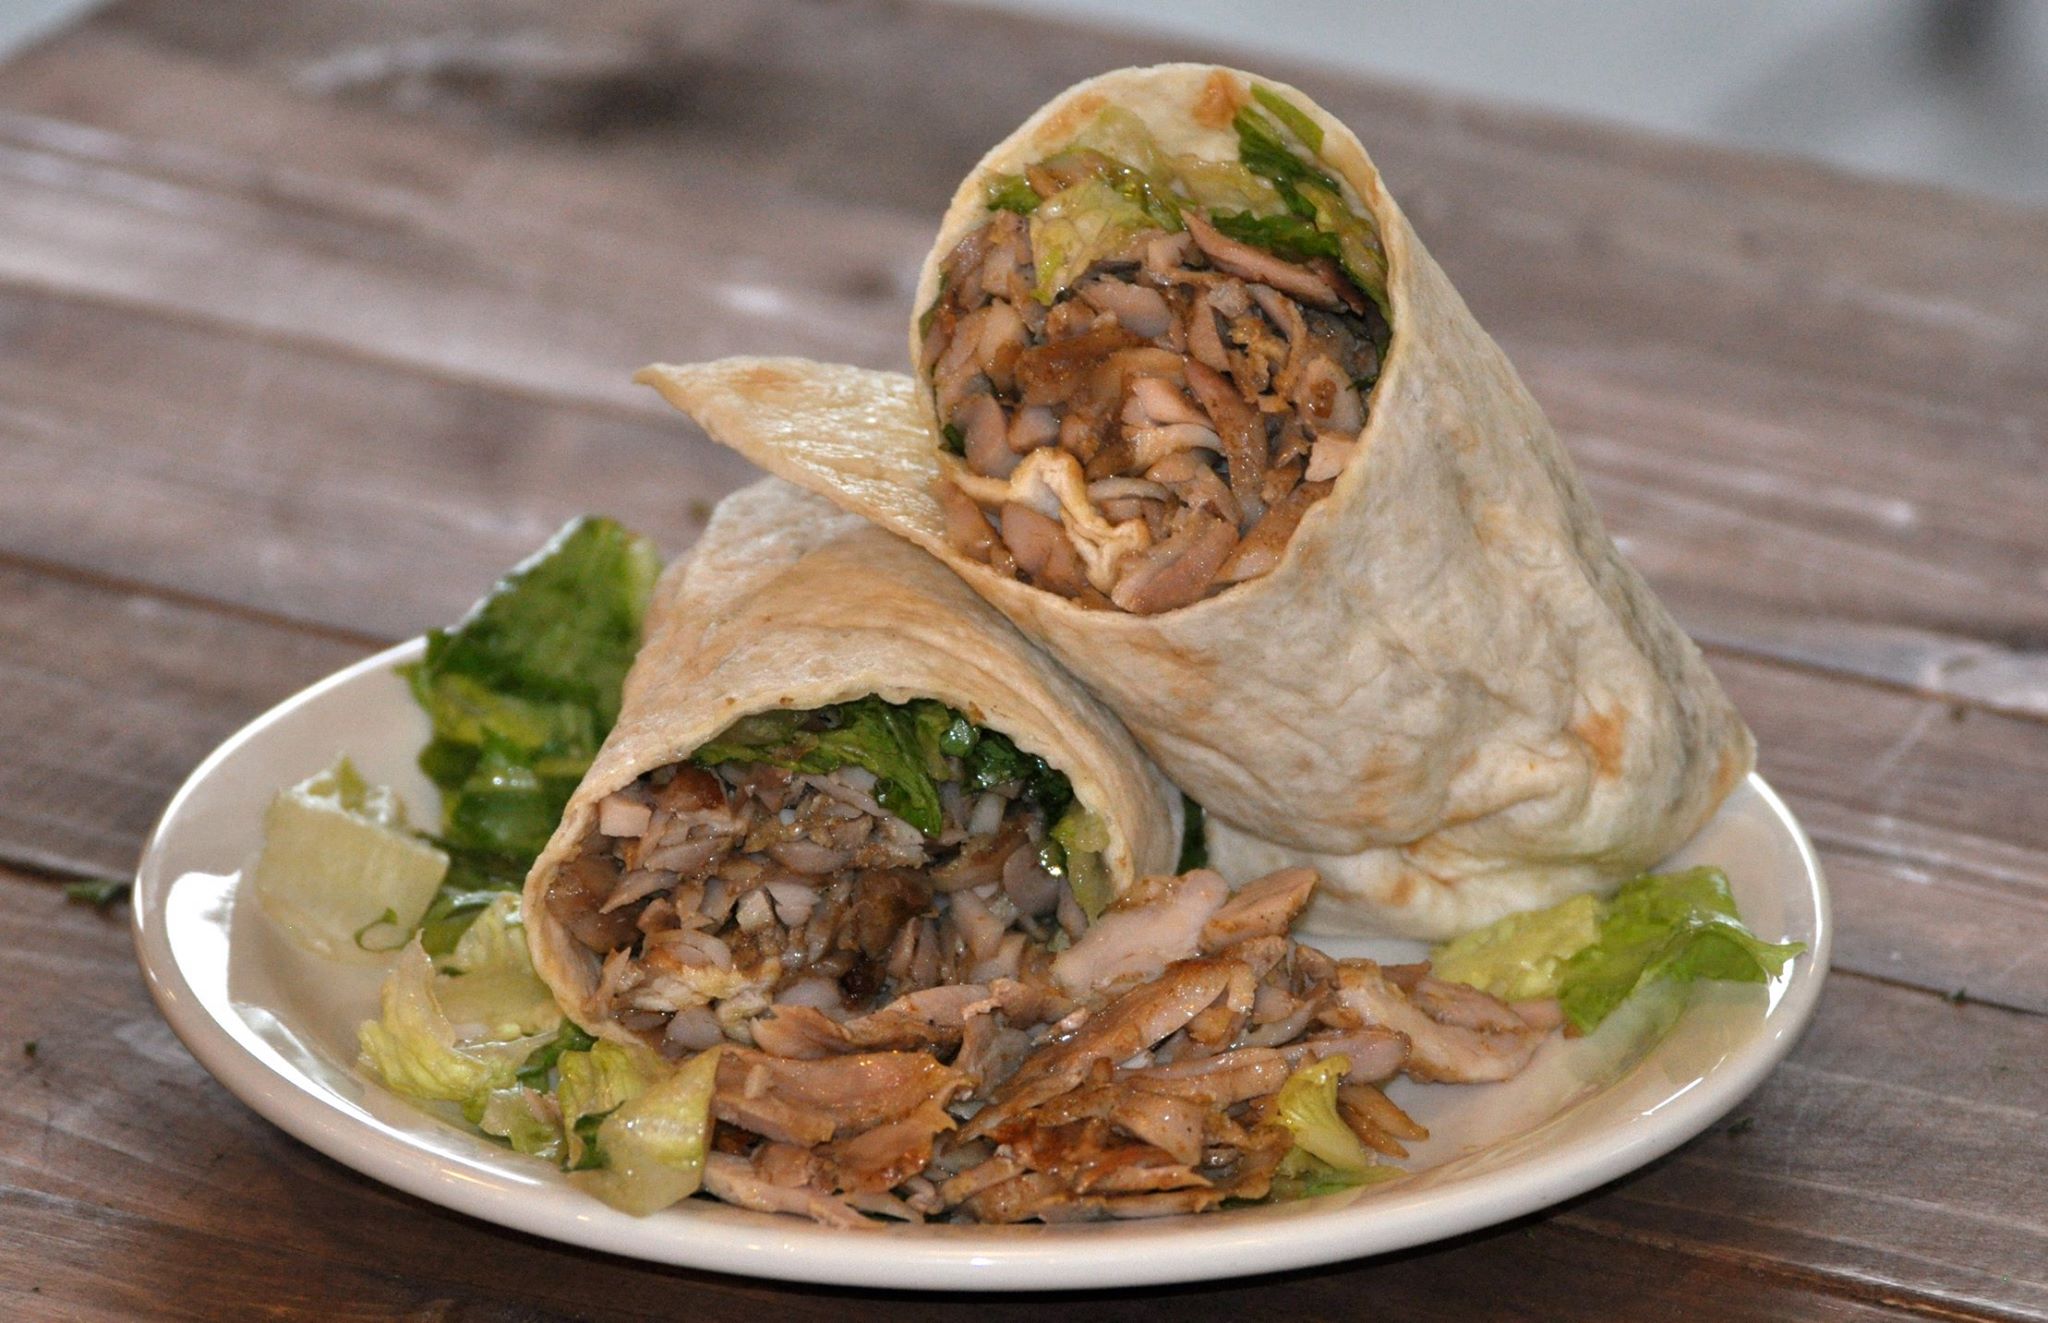 Chicken shawarma wrap from Pita Grille, now closed in Buckhead